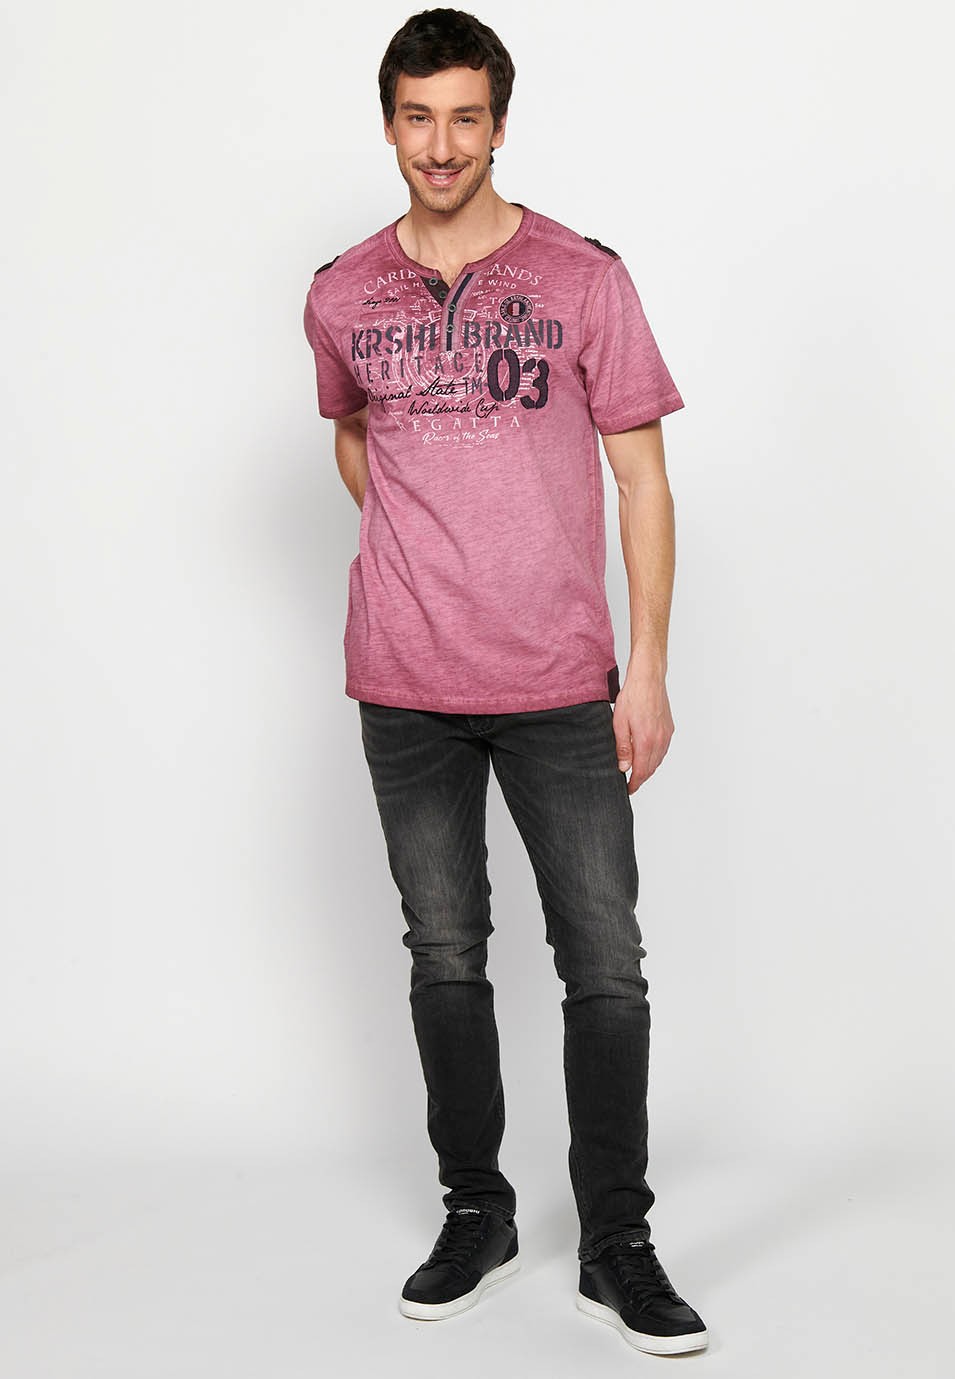 Men's Short Sleeve Cotton T-Shirt with Round Neck with Buttoned Opening and Maroon Color Front Detail 3